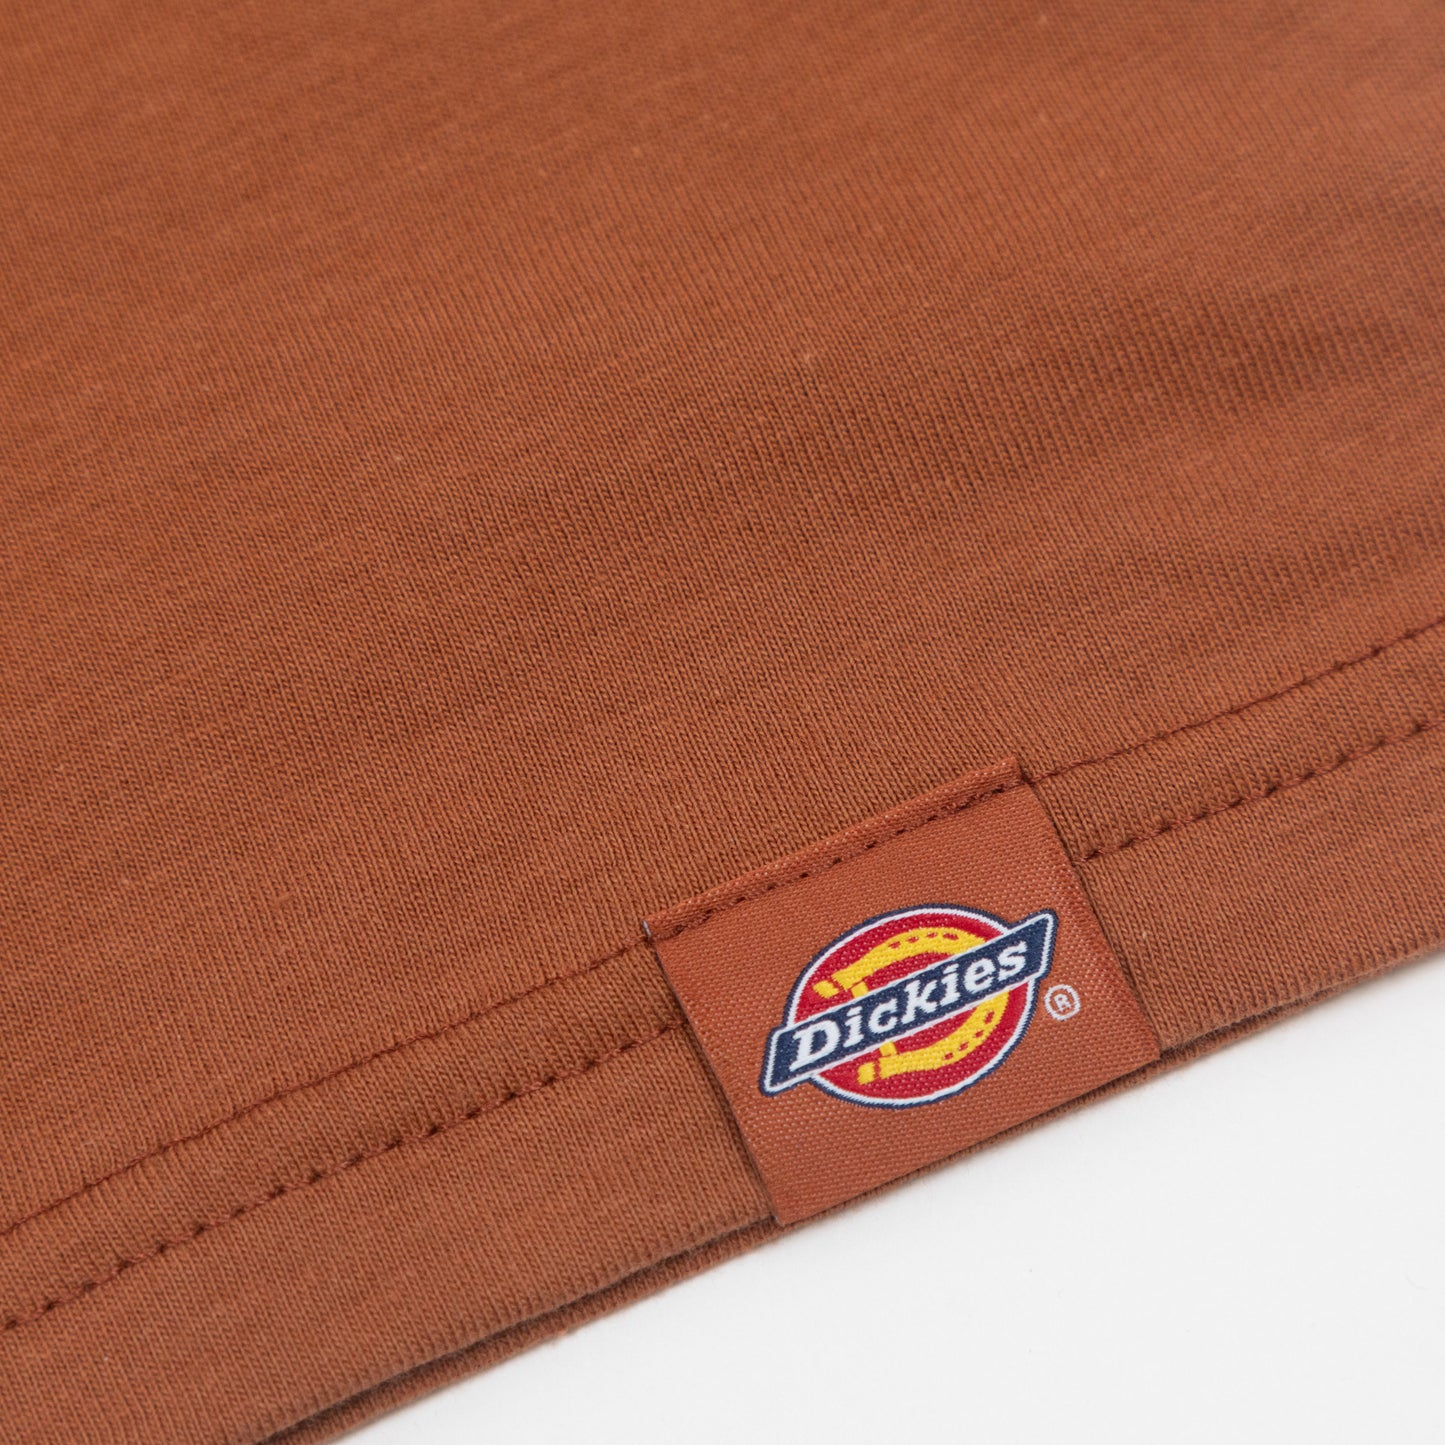 DICKIES Dumfries Graphic T-Shirt in LIGHT BROWN